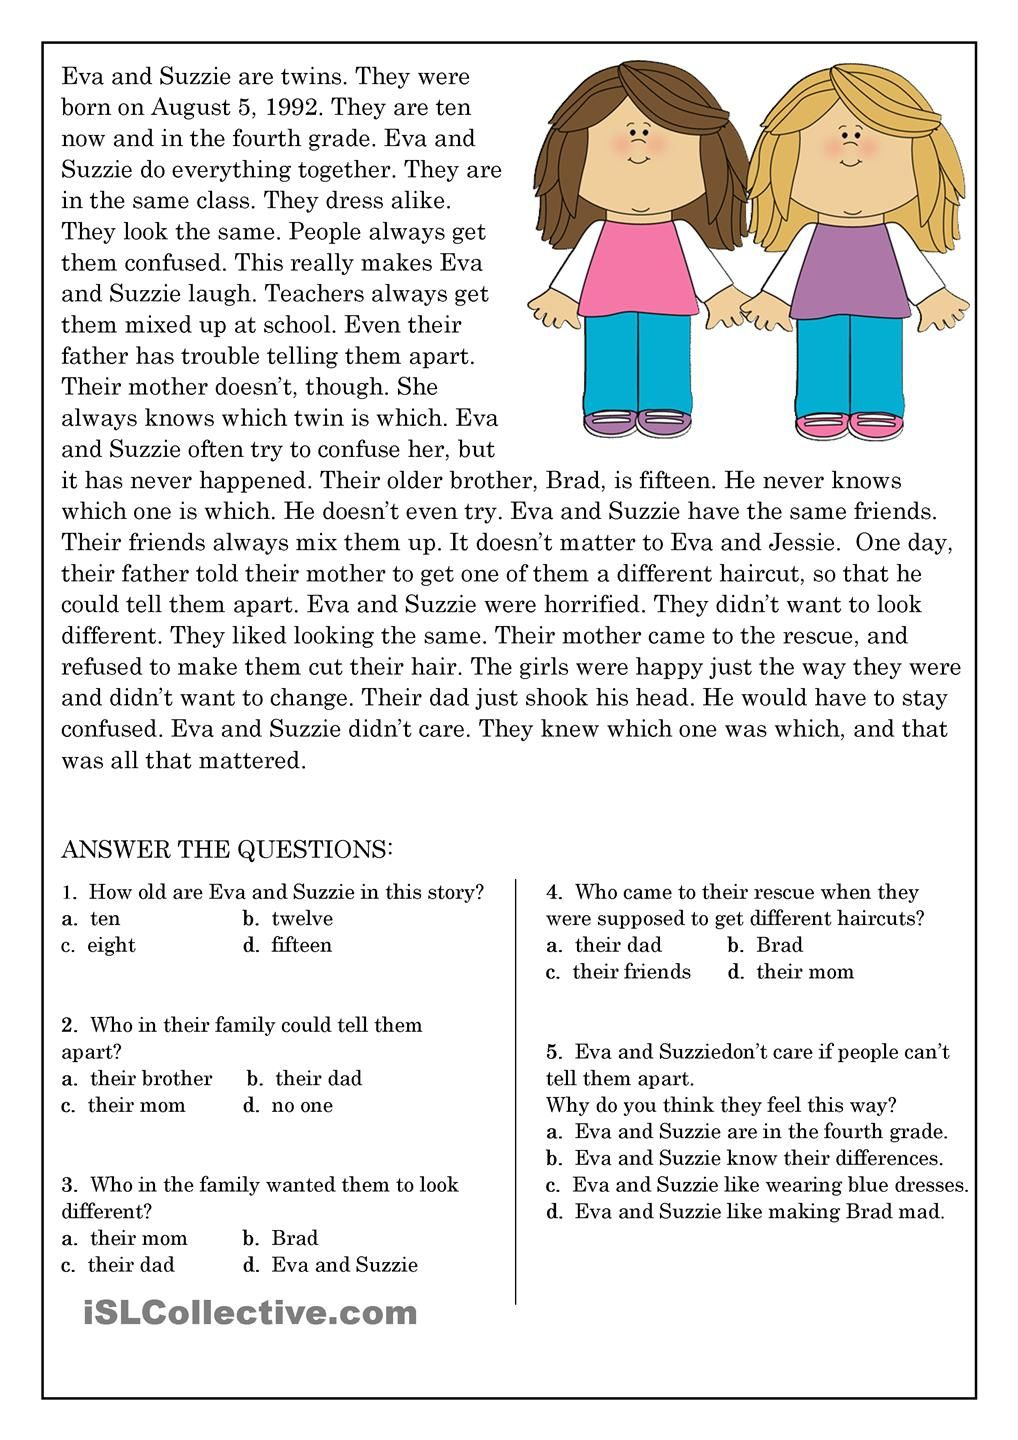 Simple Reading Comprehension Exercises With Answers ExerciseWalls